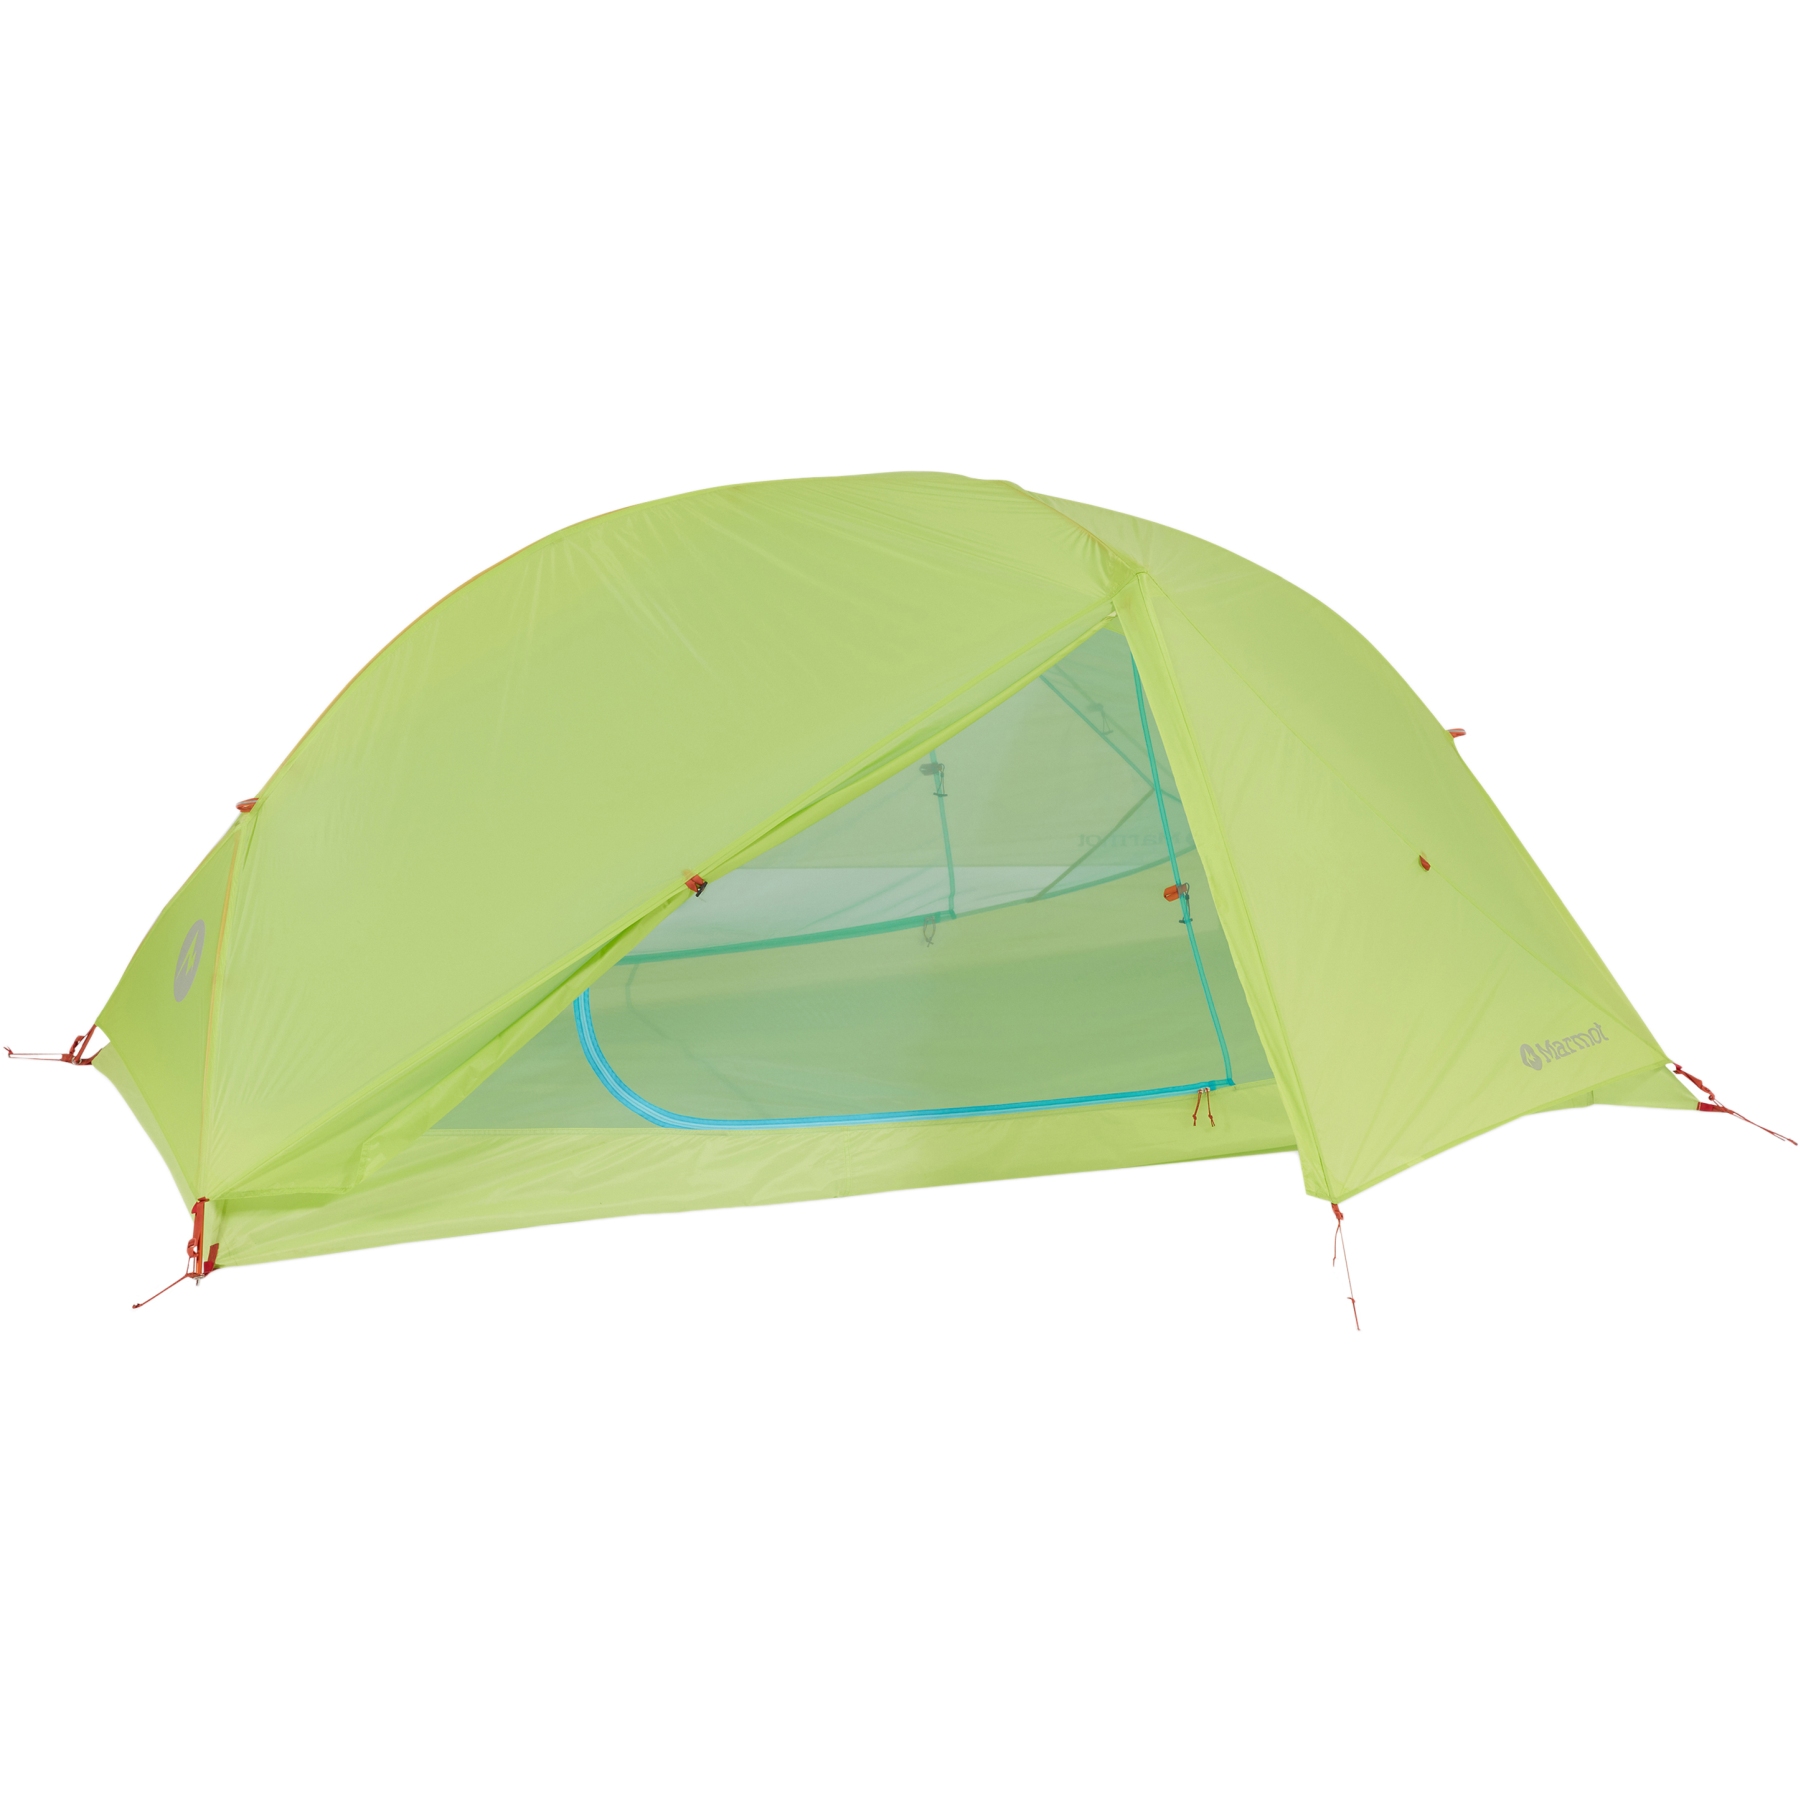 Image of Marmot Superalloy 2P Tent - green glow